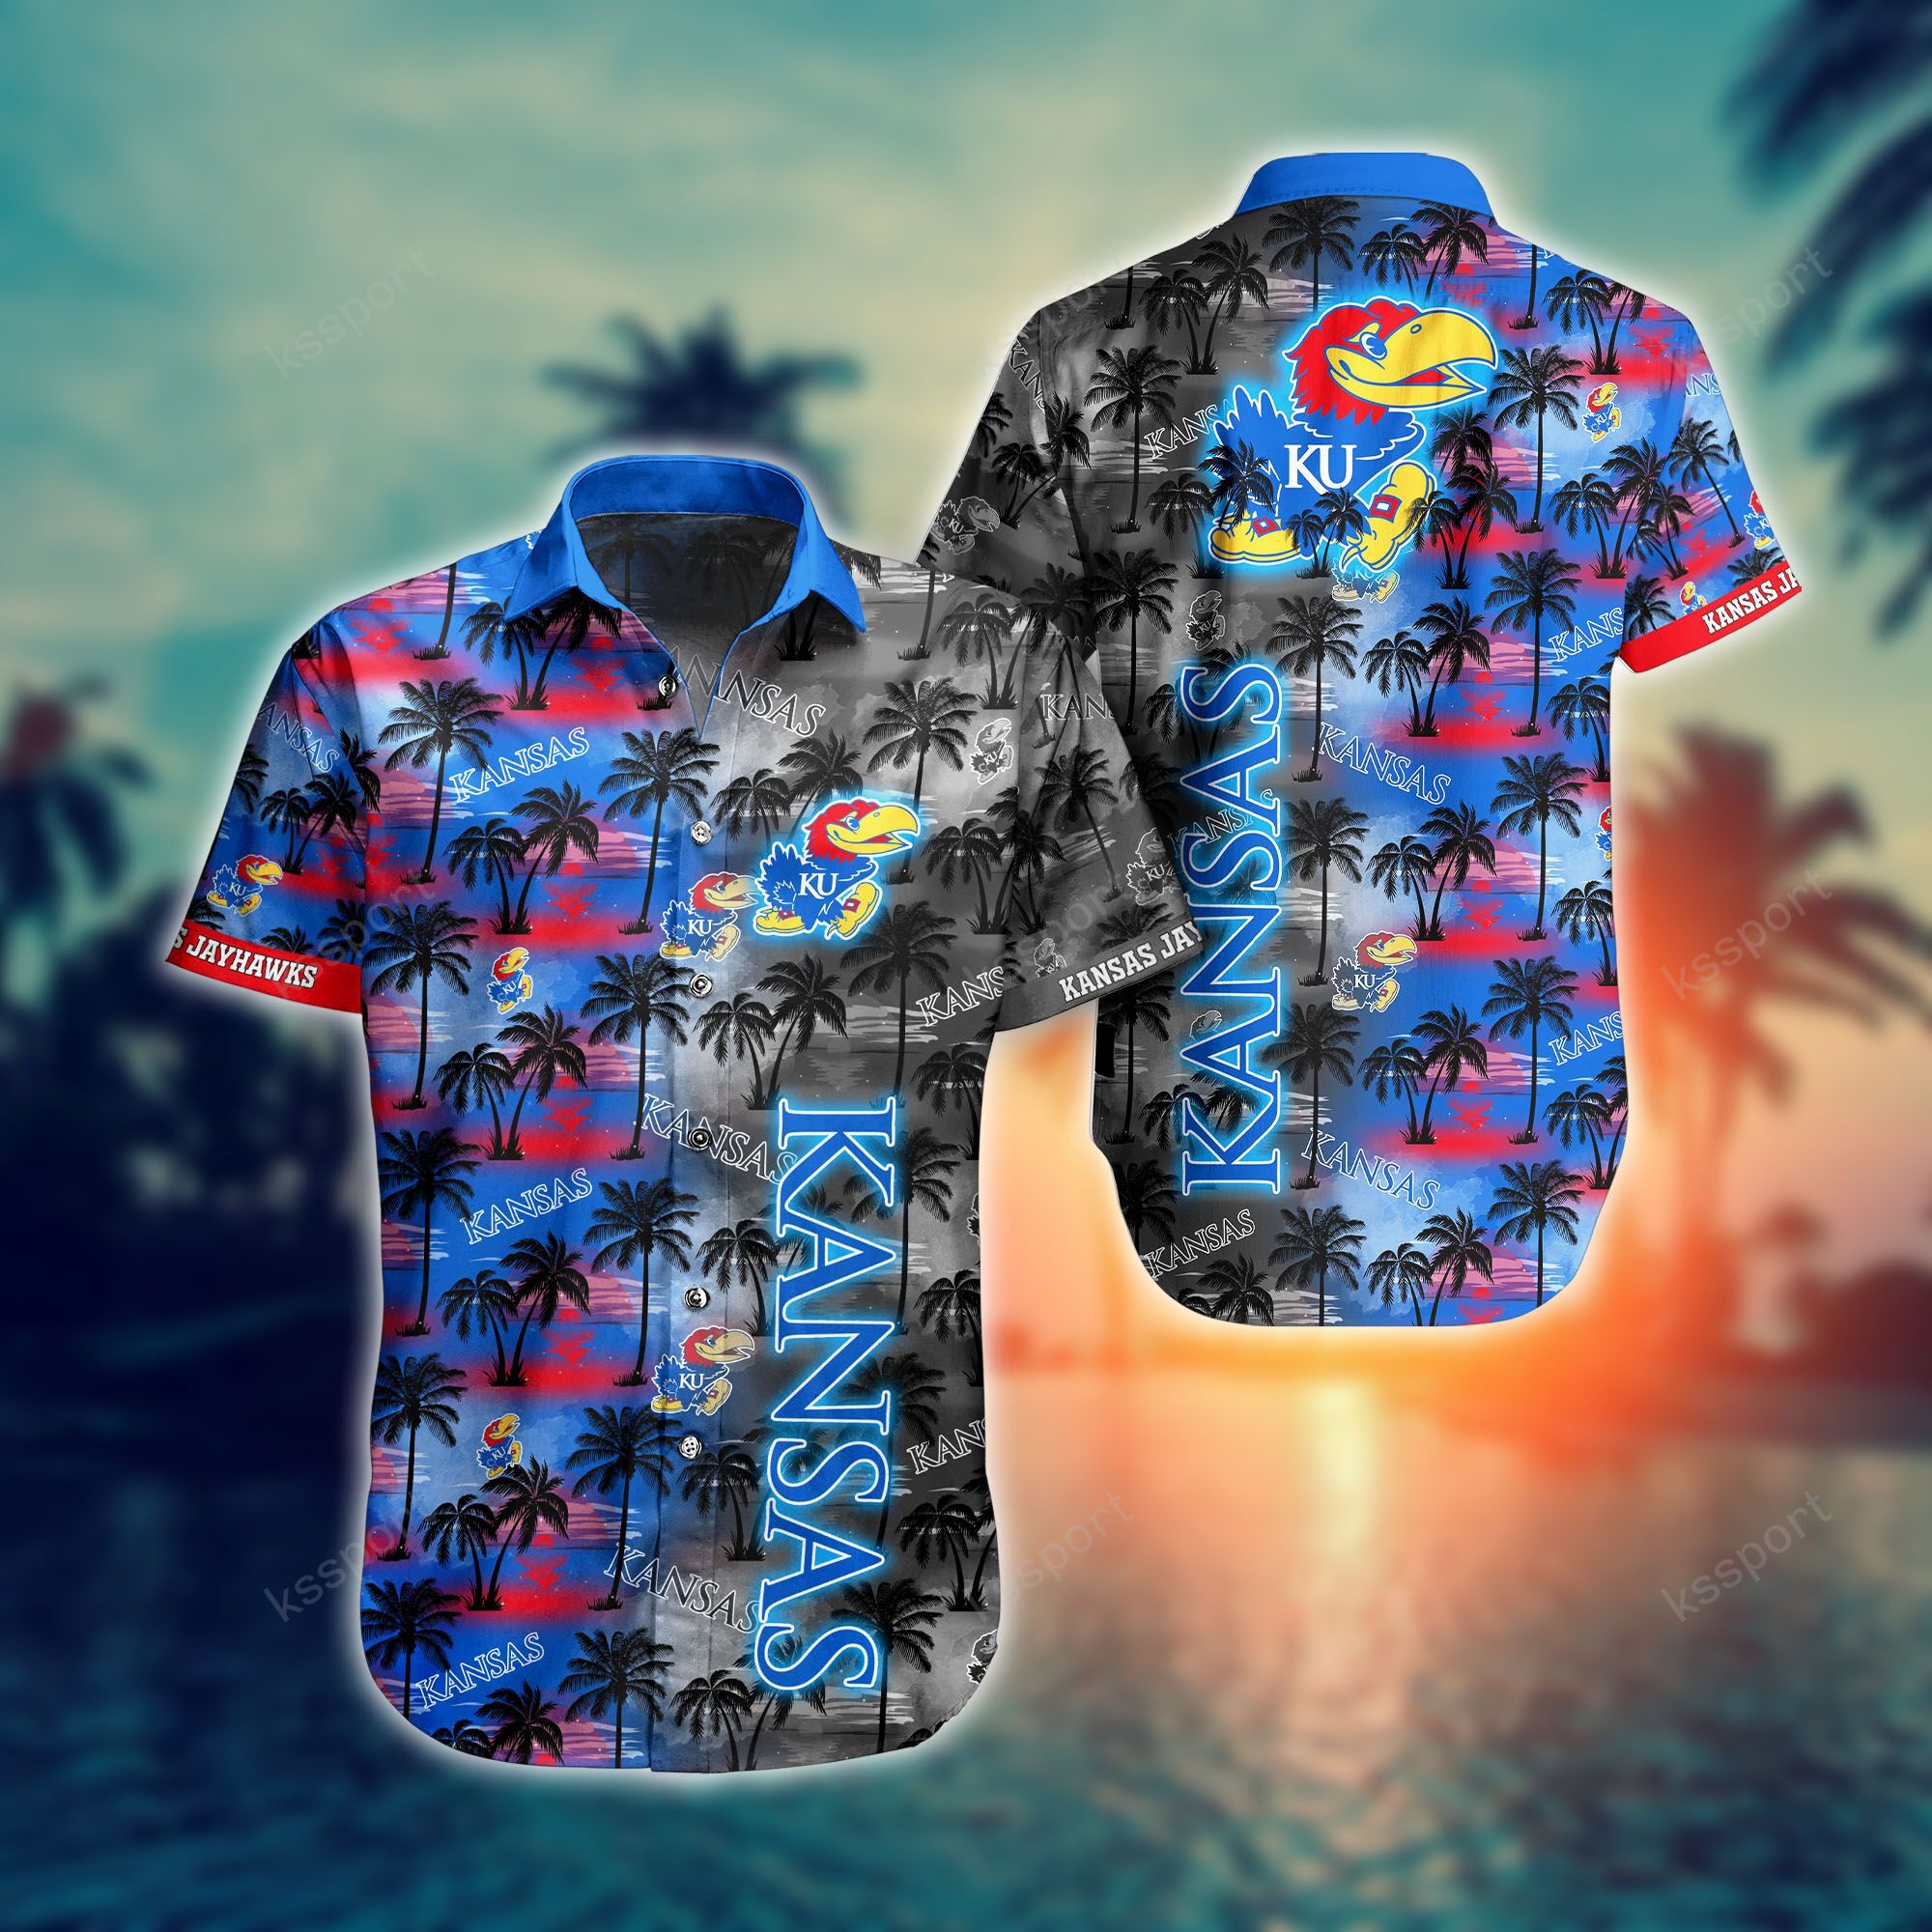 Treat yourself to a cool Hawaiian set today! 28